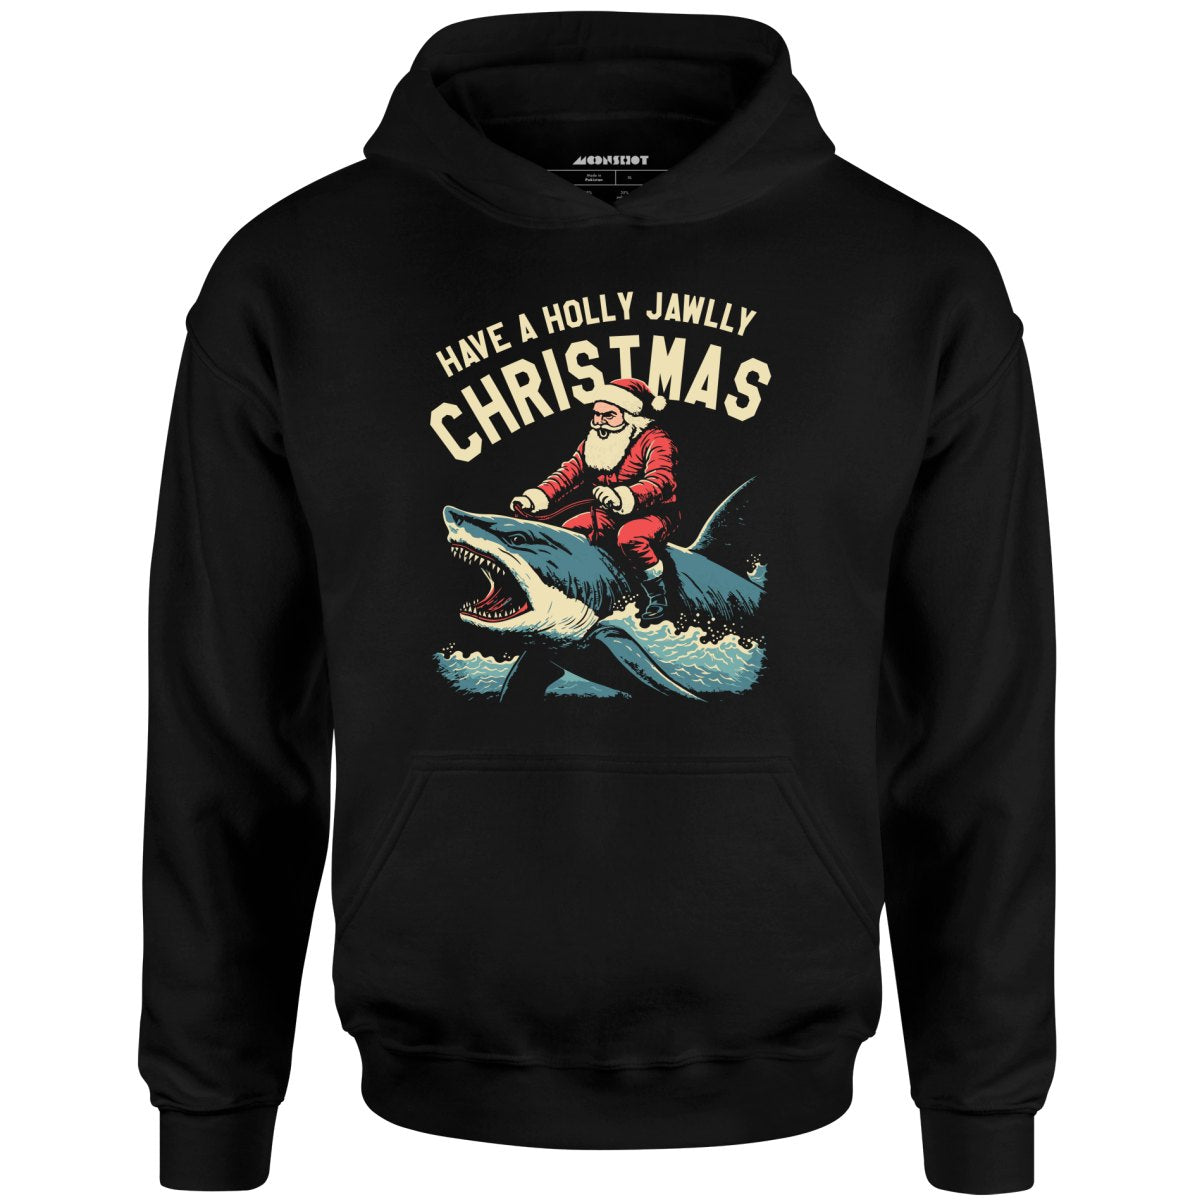 Have a Holly Jawlly Christmas - Unisex Hoodie